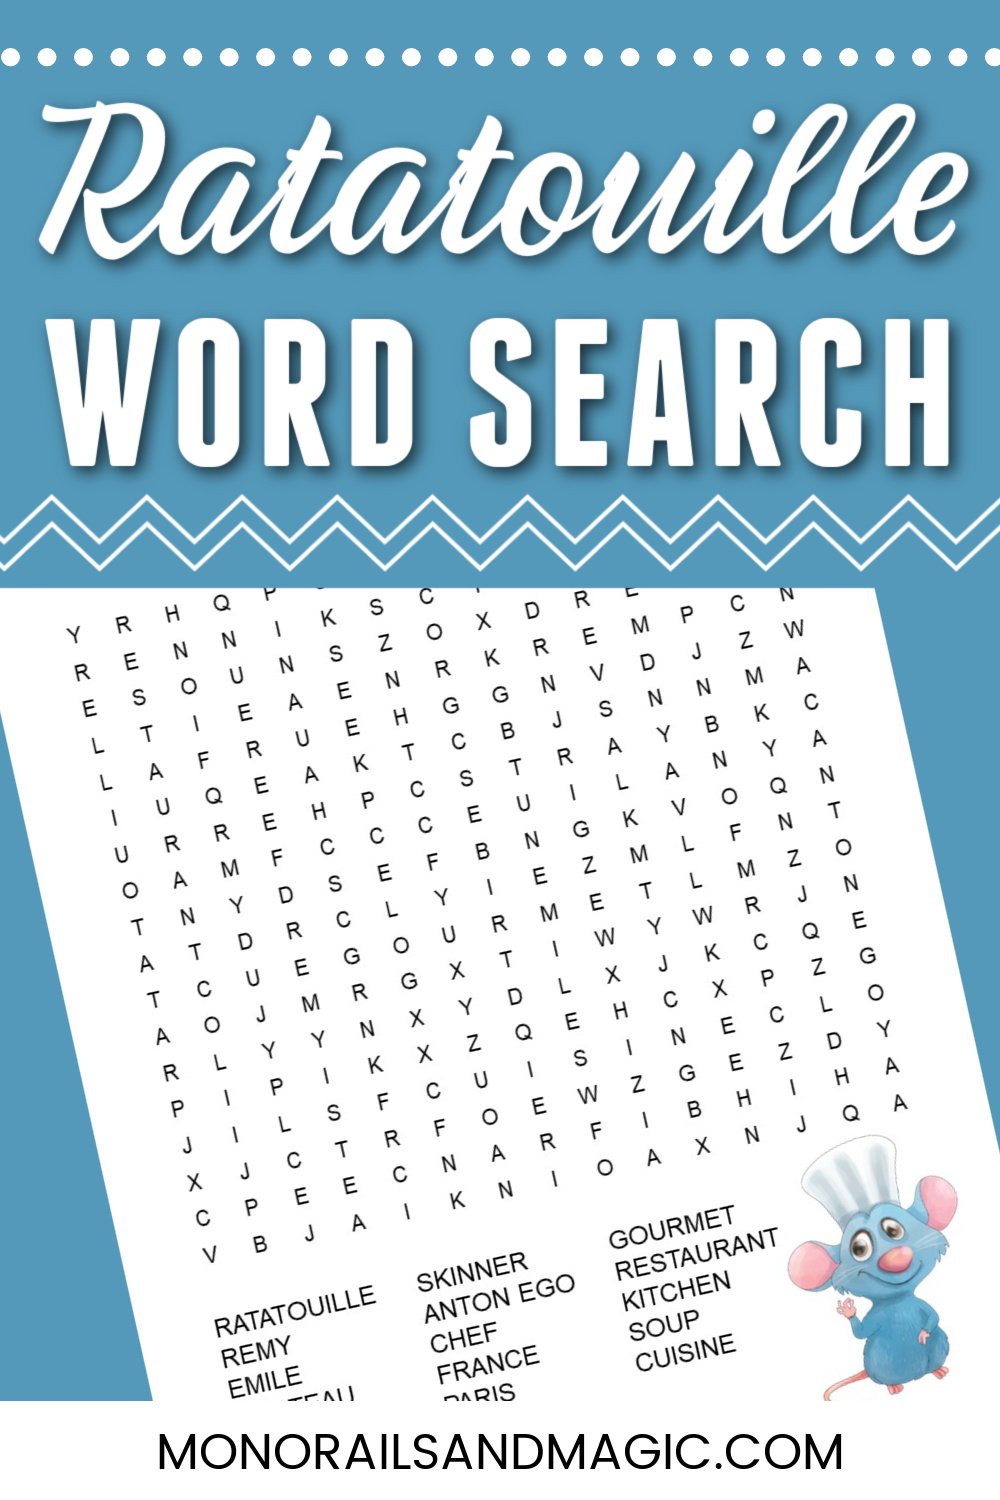 Free printable Ratatouille word search for kids.